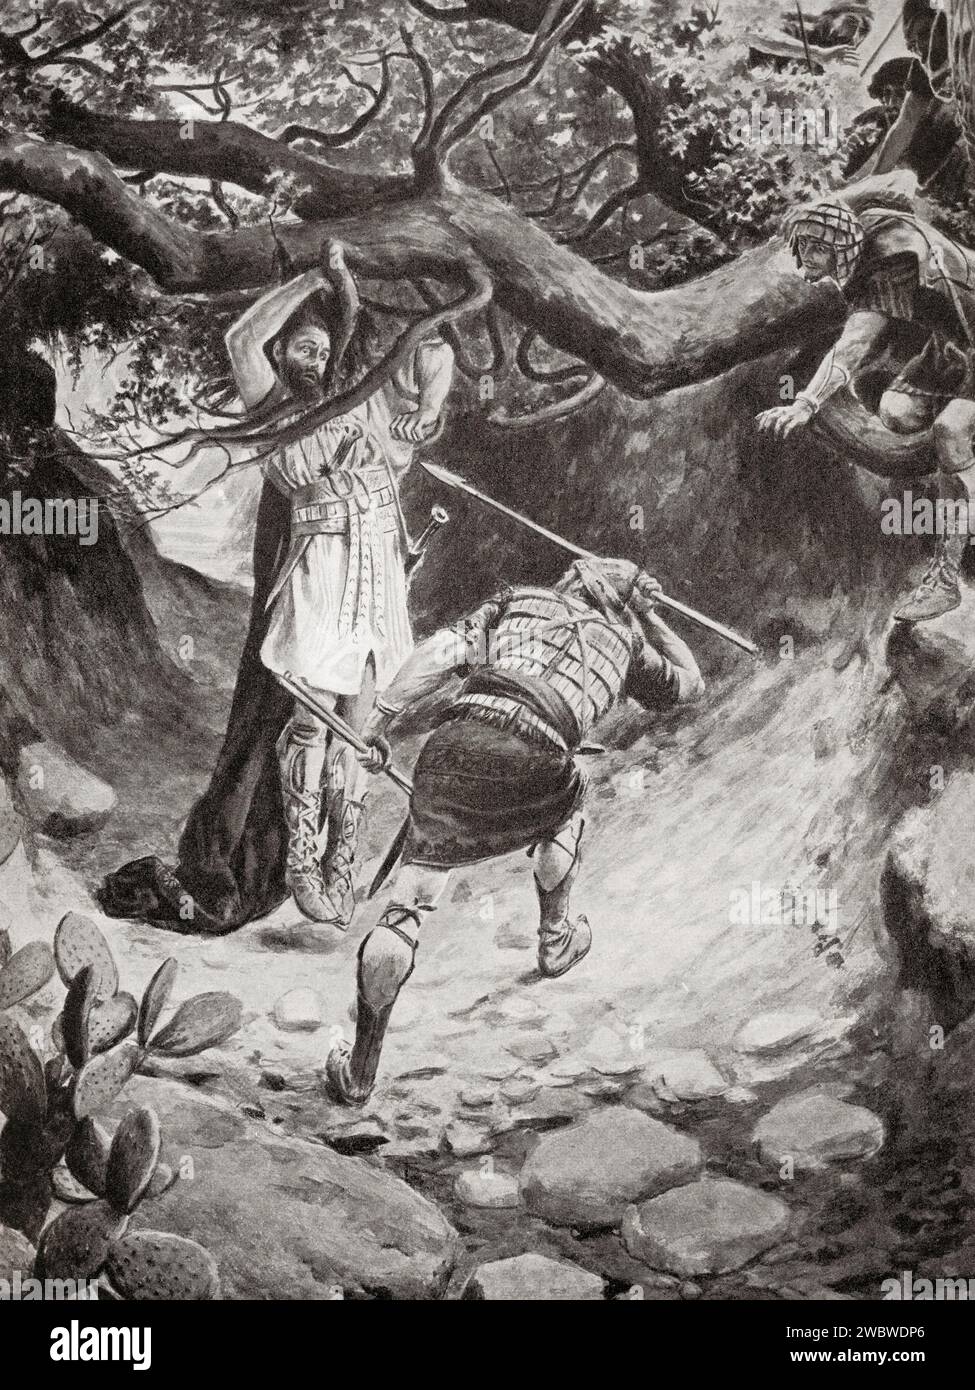 The death of Absalom or Avshalom during the Battle of the Wood of Ephraim.  From Hutchinson's History of the Nations, published 1915. Stock Photo